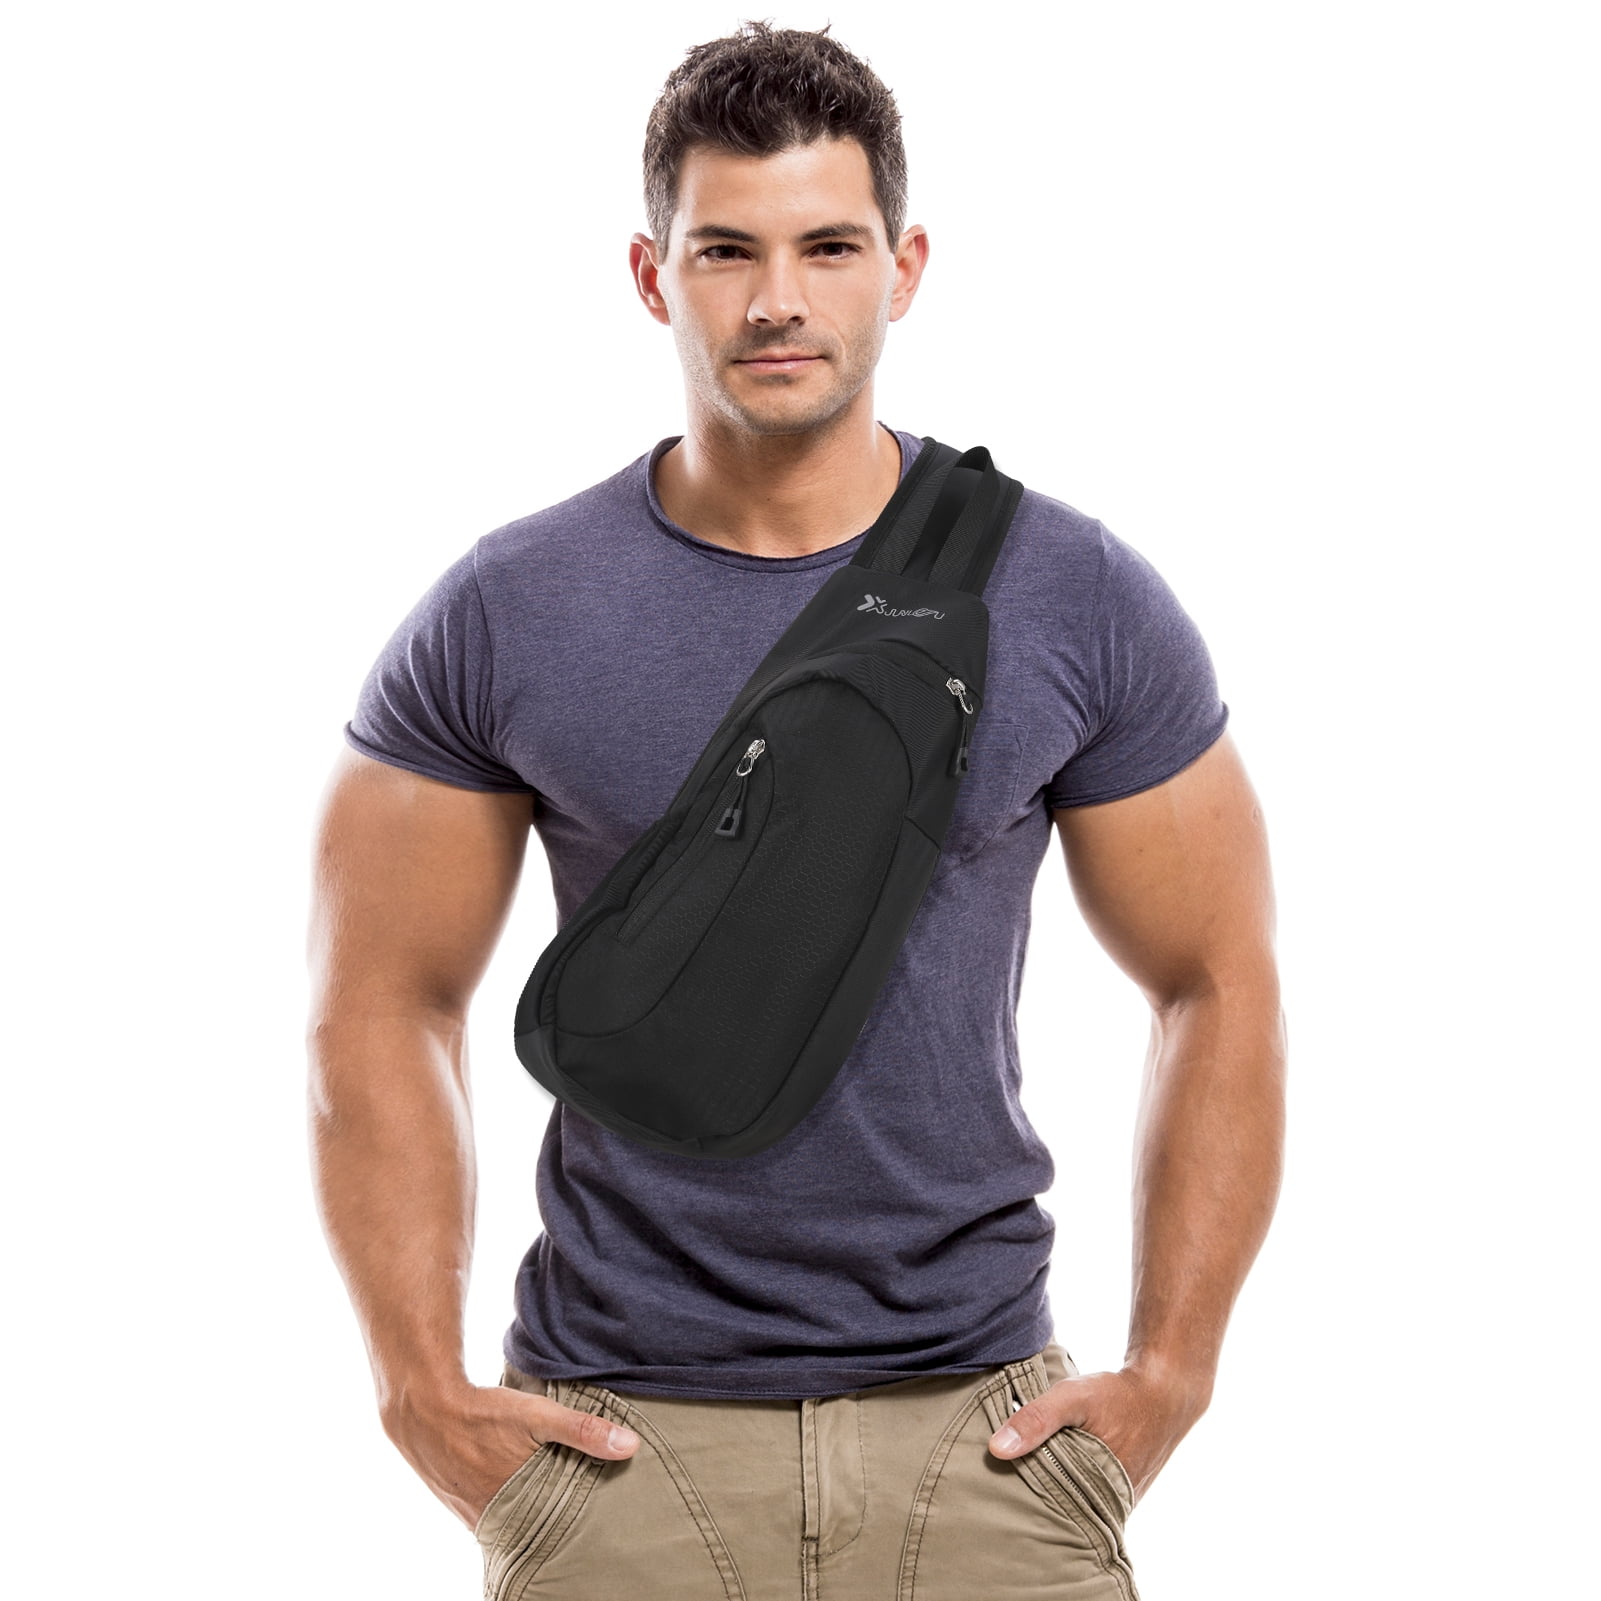 SYGA Motorcycle Bag Code Anti Theft Chest Bag Mens Bag Shoulder Bag Sports  Waist Bag Casual Blue for Girls (10-15Years) Online in India, Buy at  FirstCry.com - 14539128